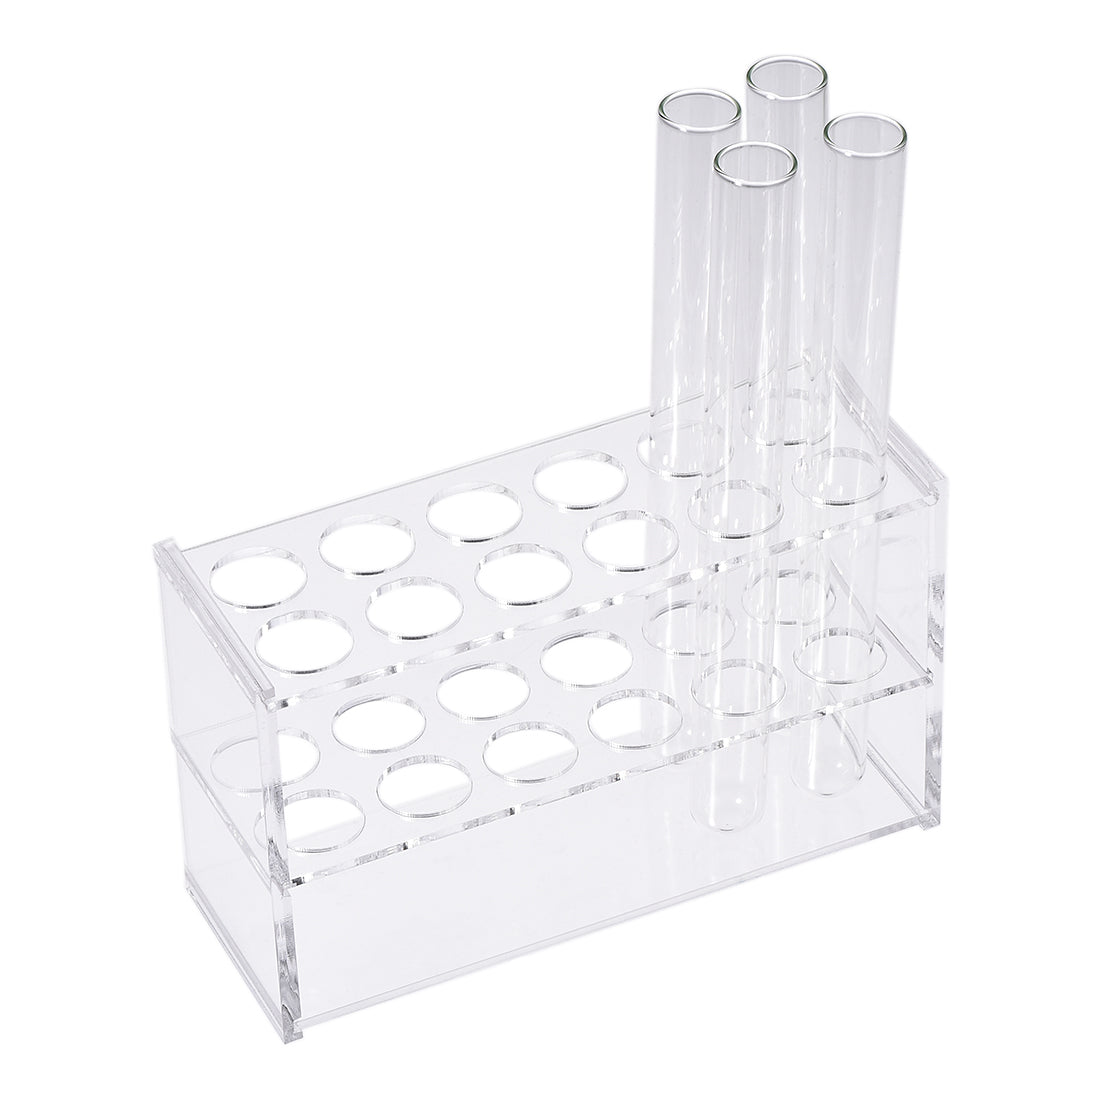 uxcell Uxcell Acrylic Test Tube Holder Rack 2x6 Wells for 25ml Centrifuge Tubes Clear